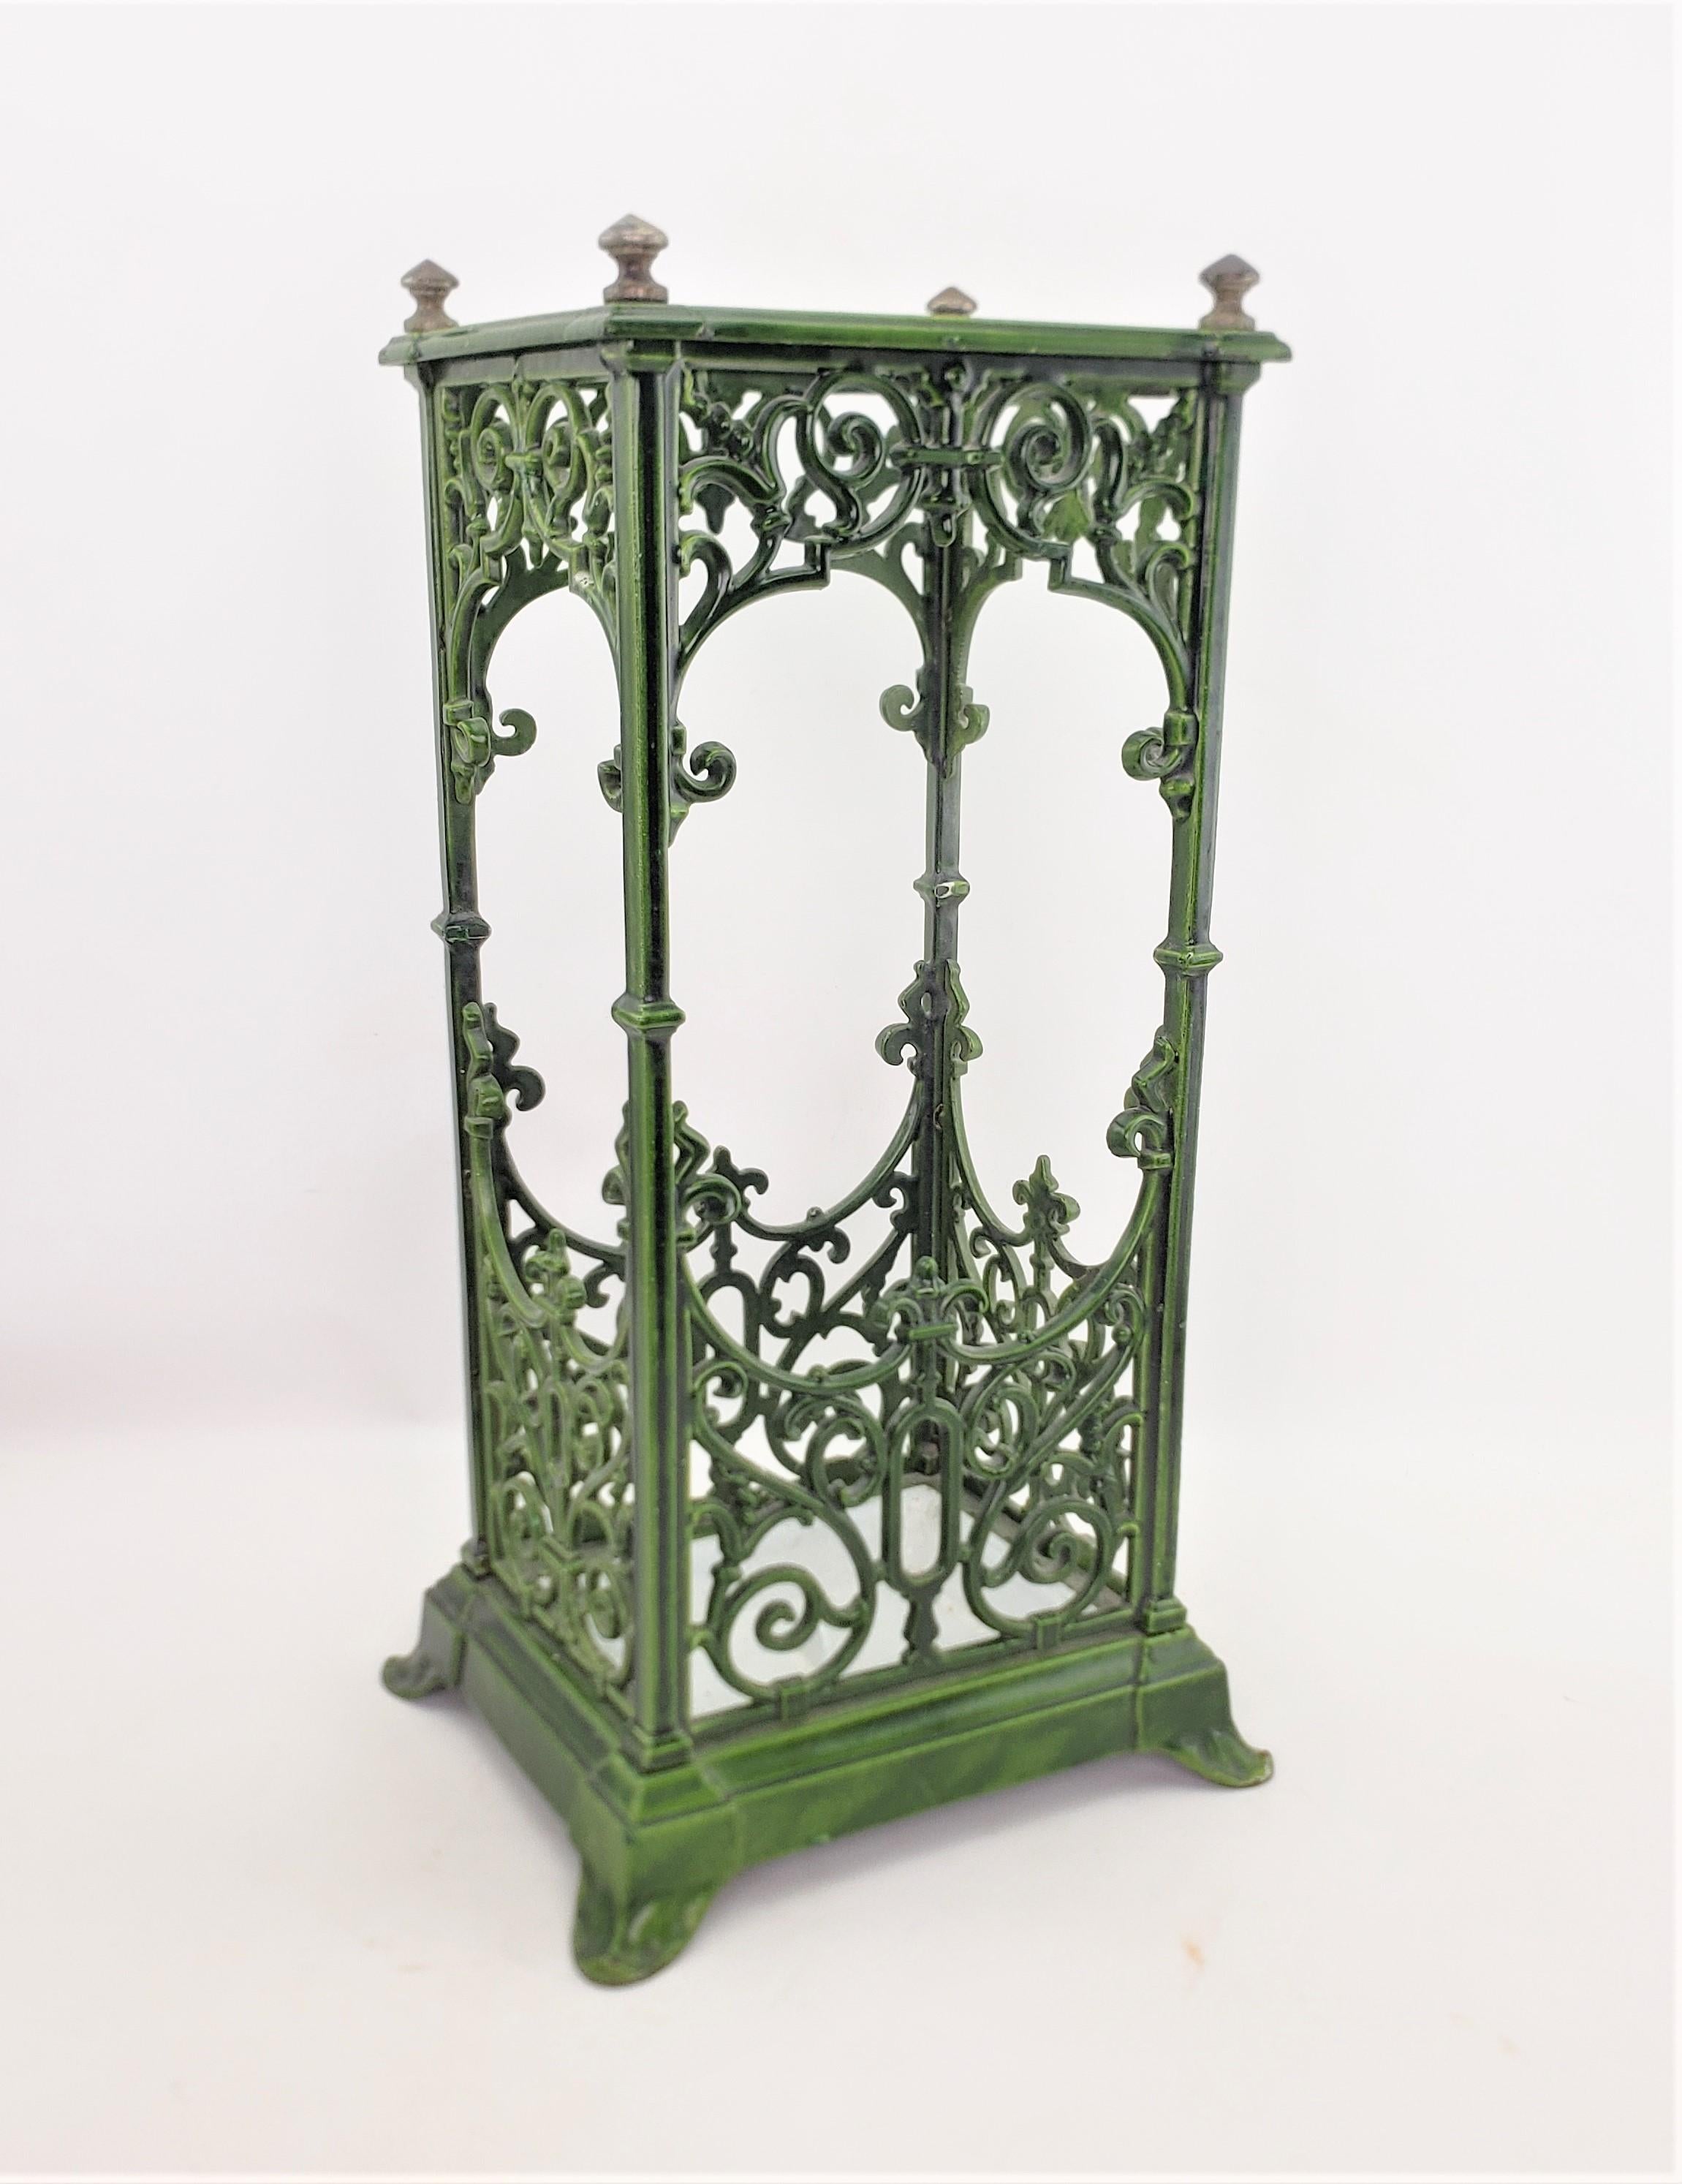 This antique walking stick or umbrella stand is unsigned, but presumed to have originated from England and date to approximately 1900 and done in the period Edwardian style. The stand is composed of cast iron which has been enameled in a deep thick